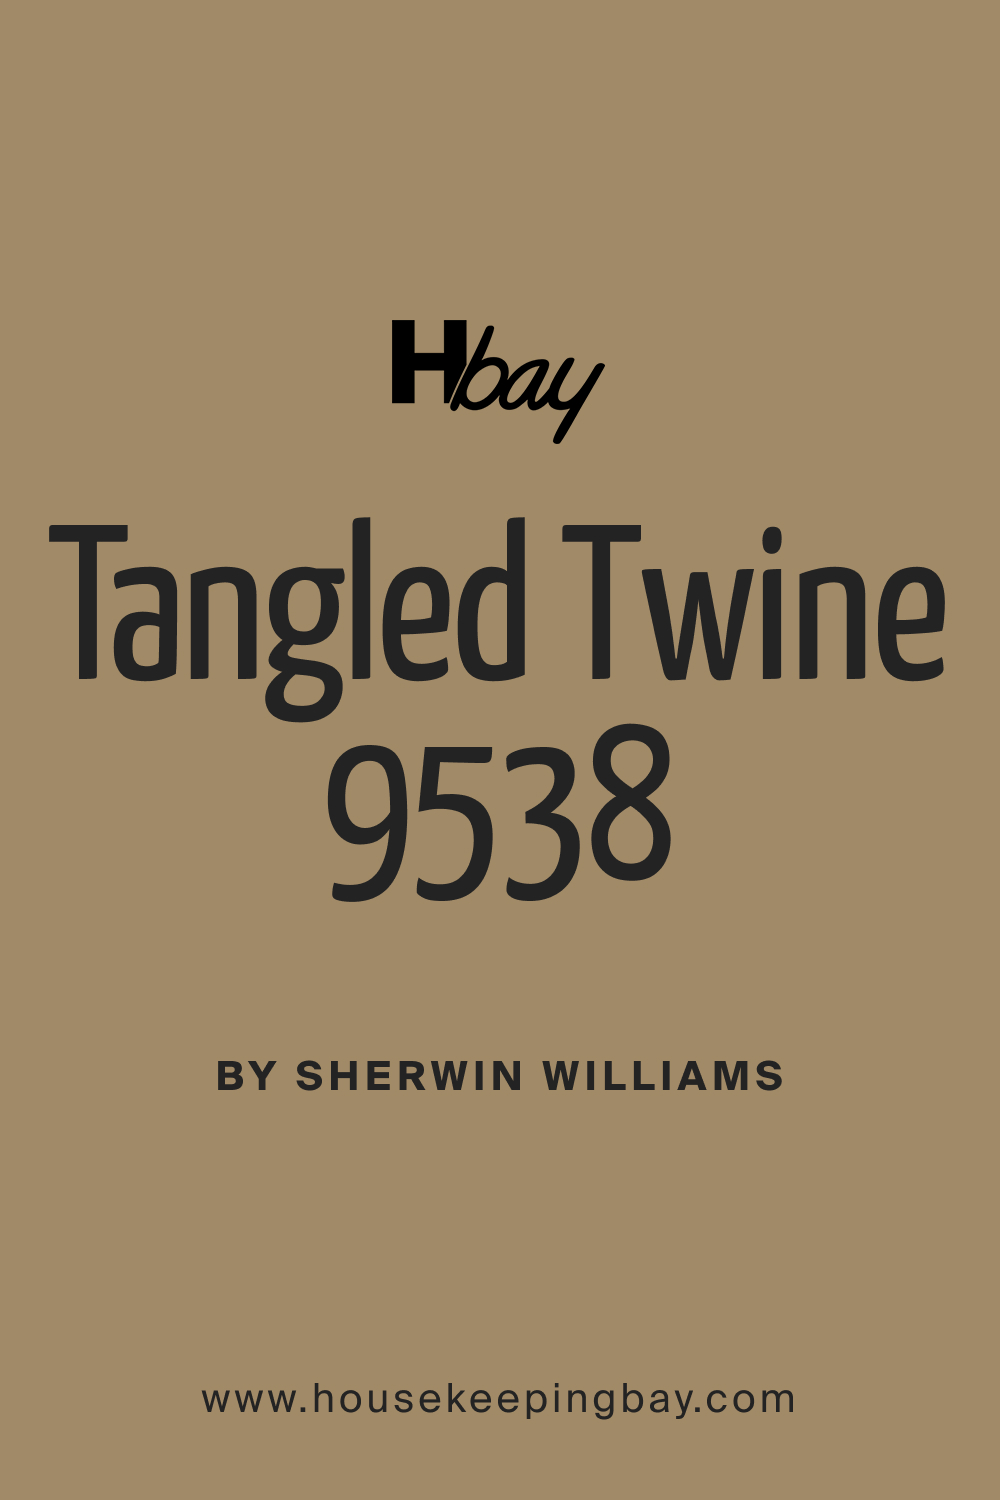 SW 9538 Tangled Twine Paint Color by Sherwin Williams